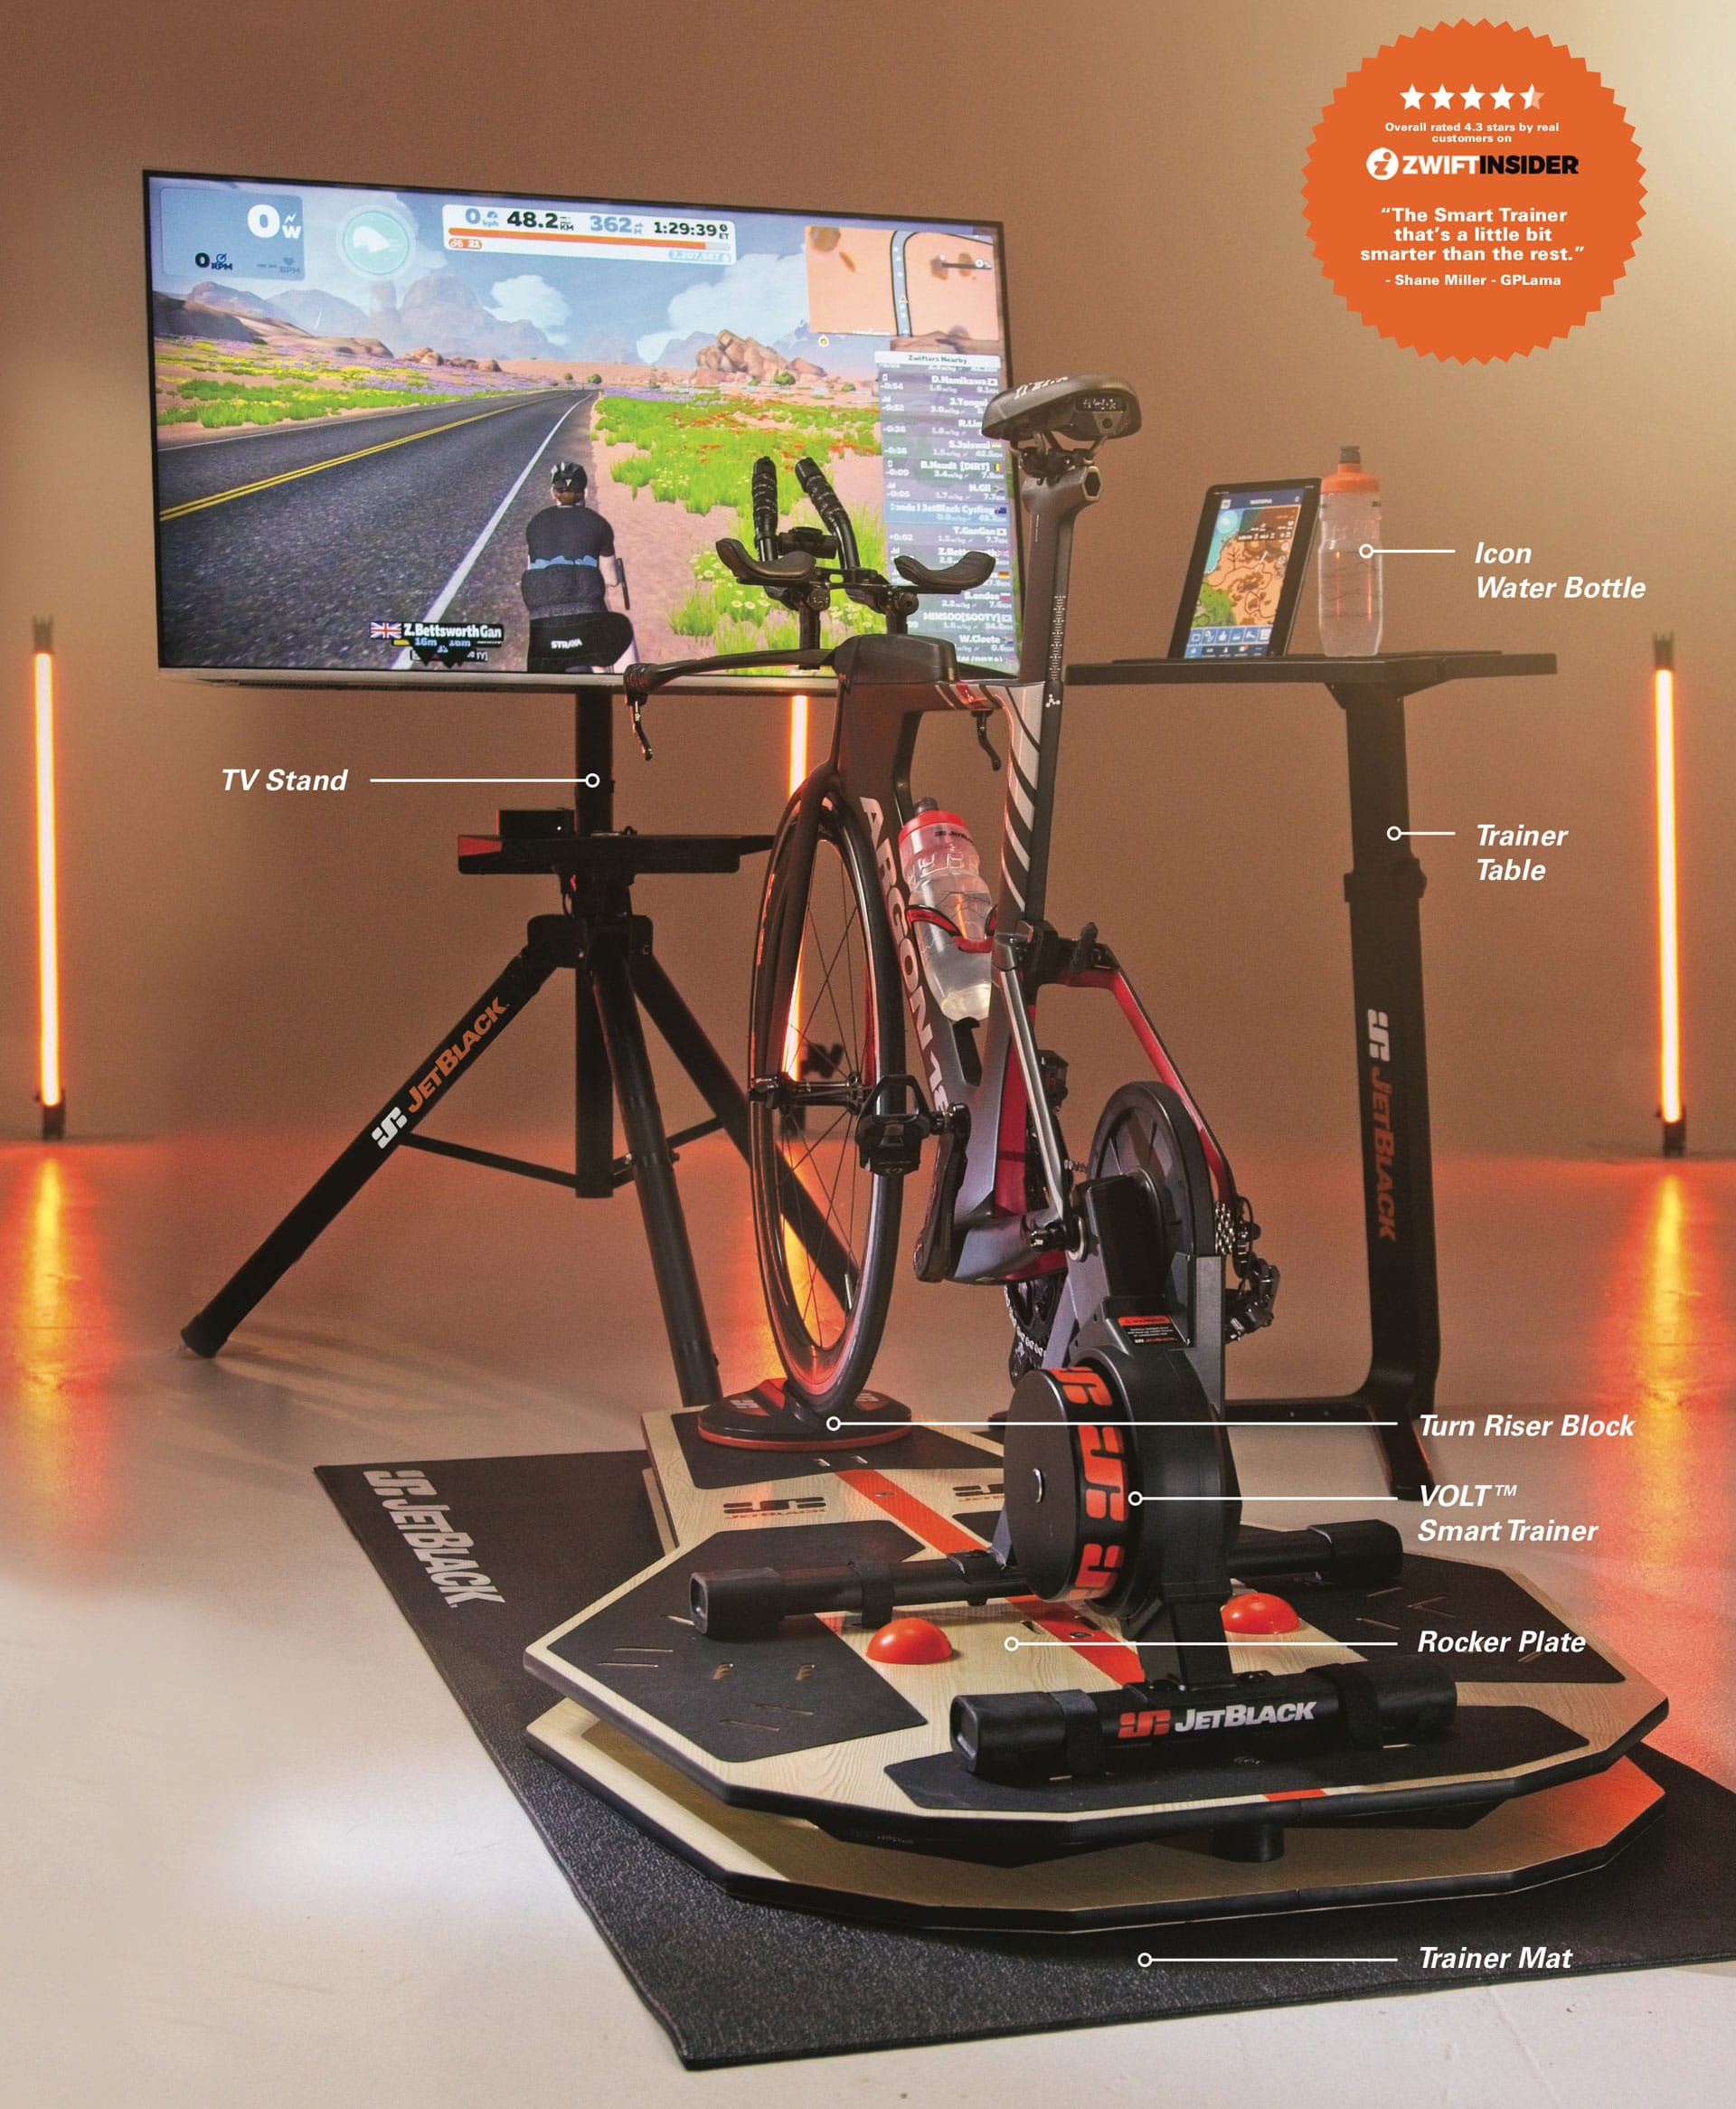 The complete JetBlack Indoor Cycling setup